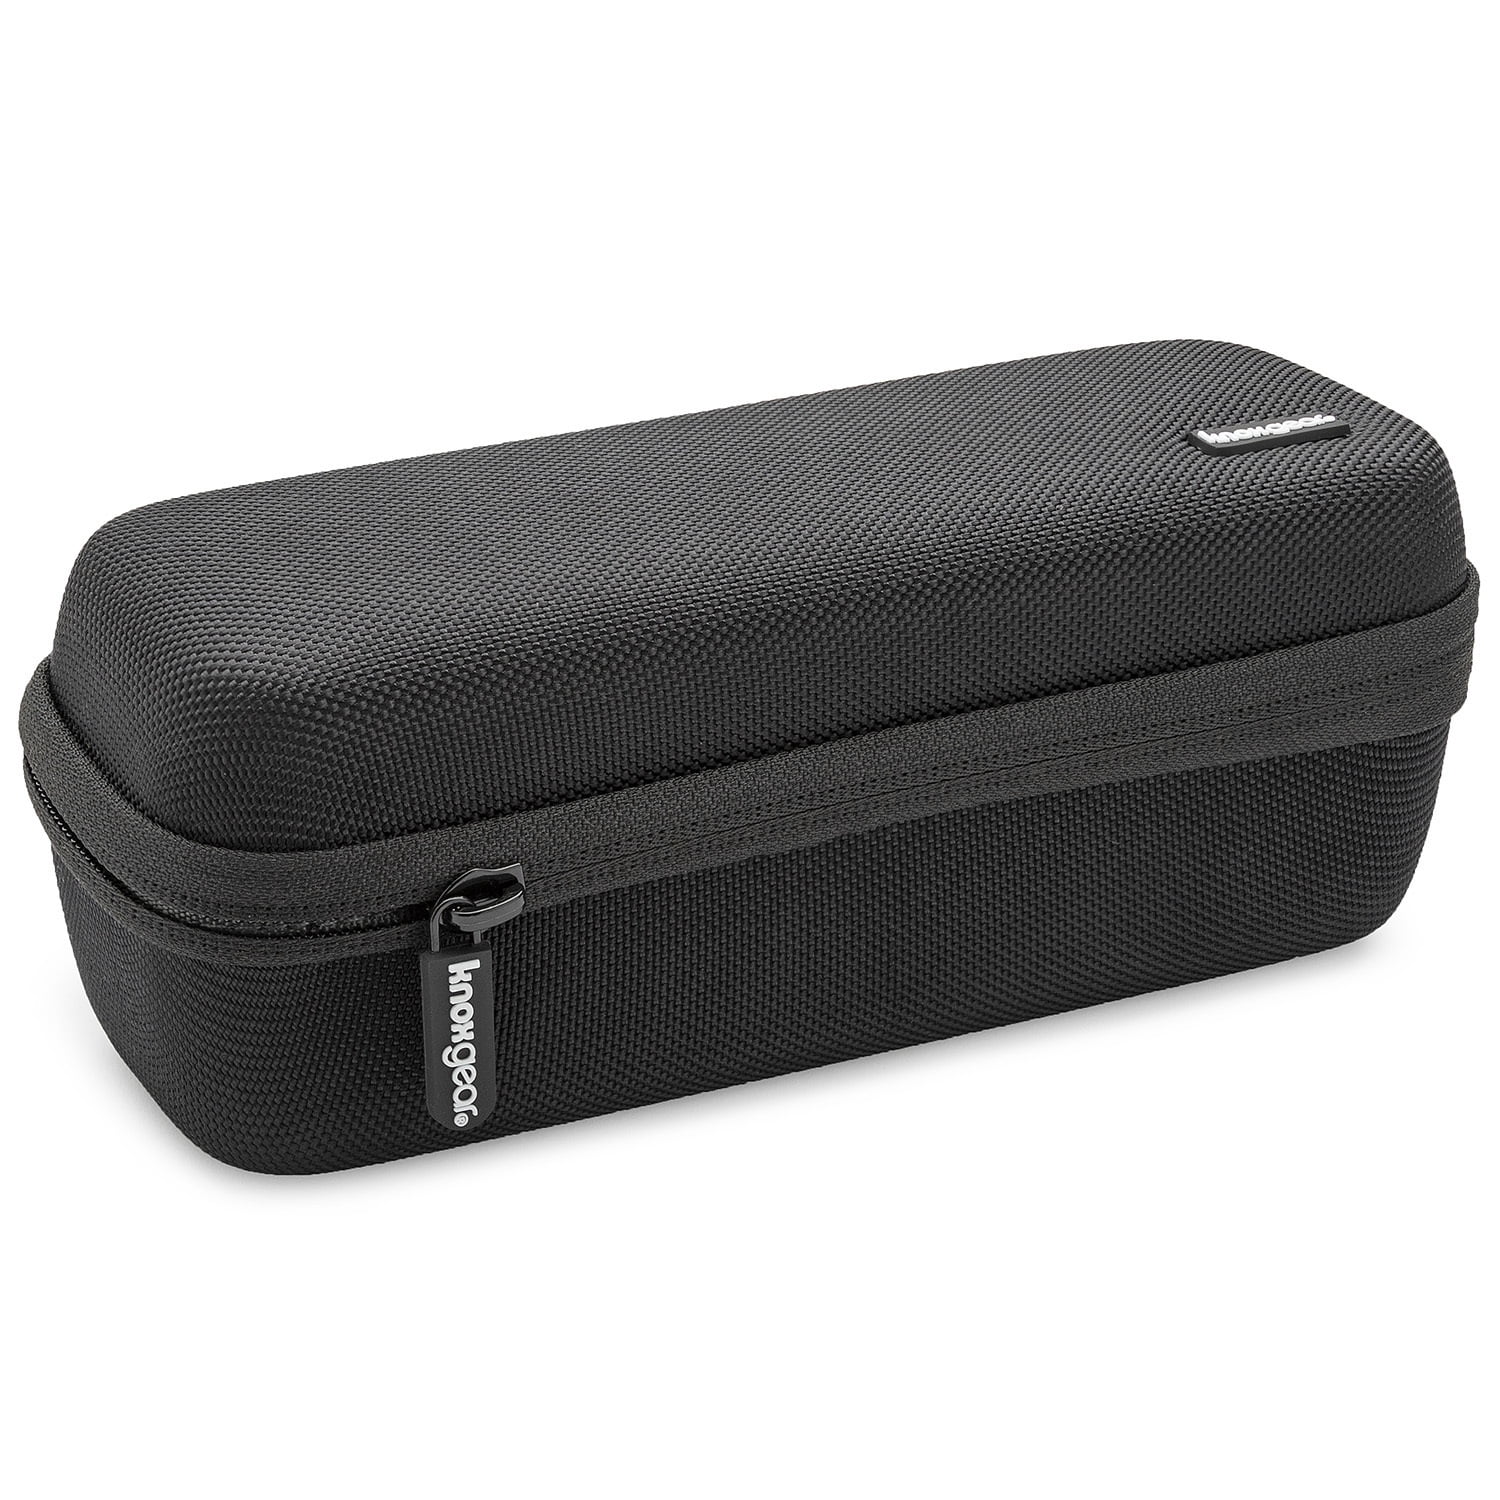 MASiKEN Hard Case for Tribit Maxsound Plus/Sony SRS-XB32 Protective Carrying Storage Bag